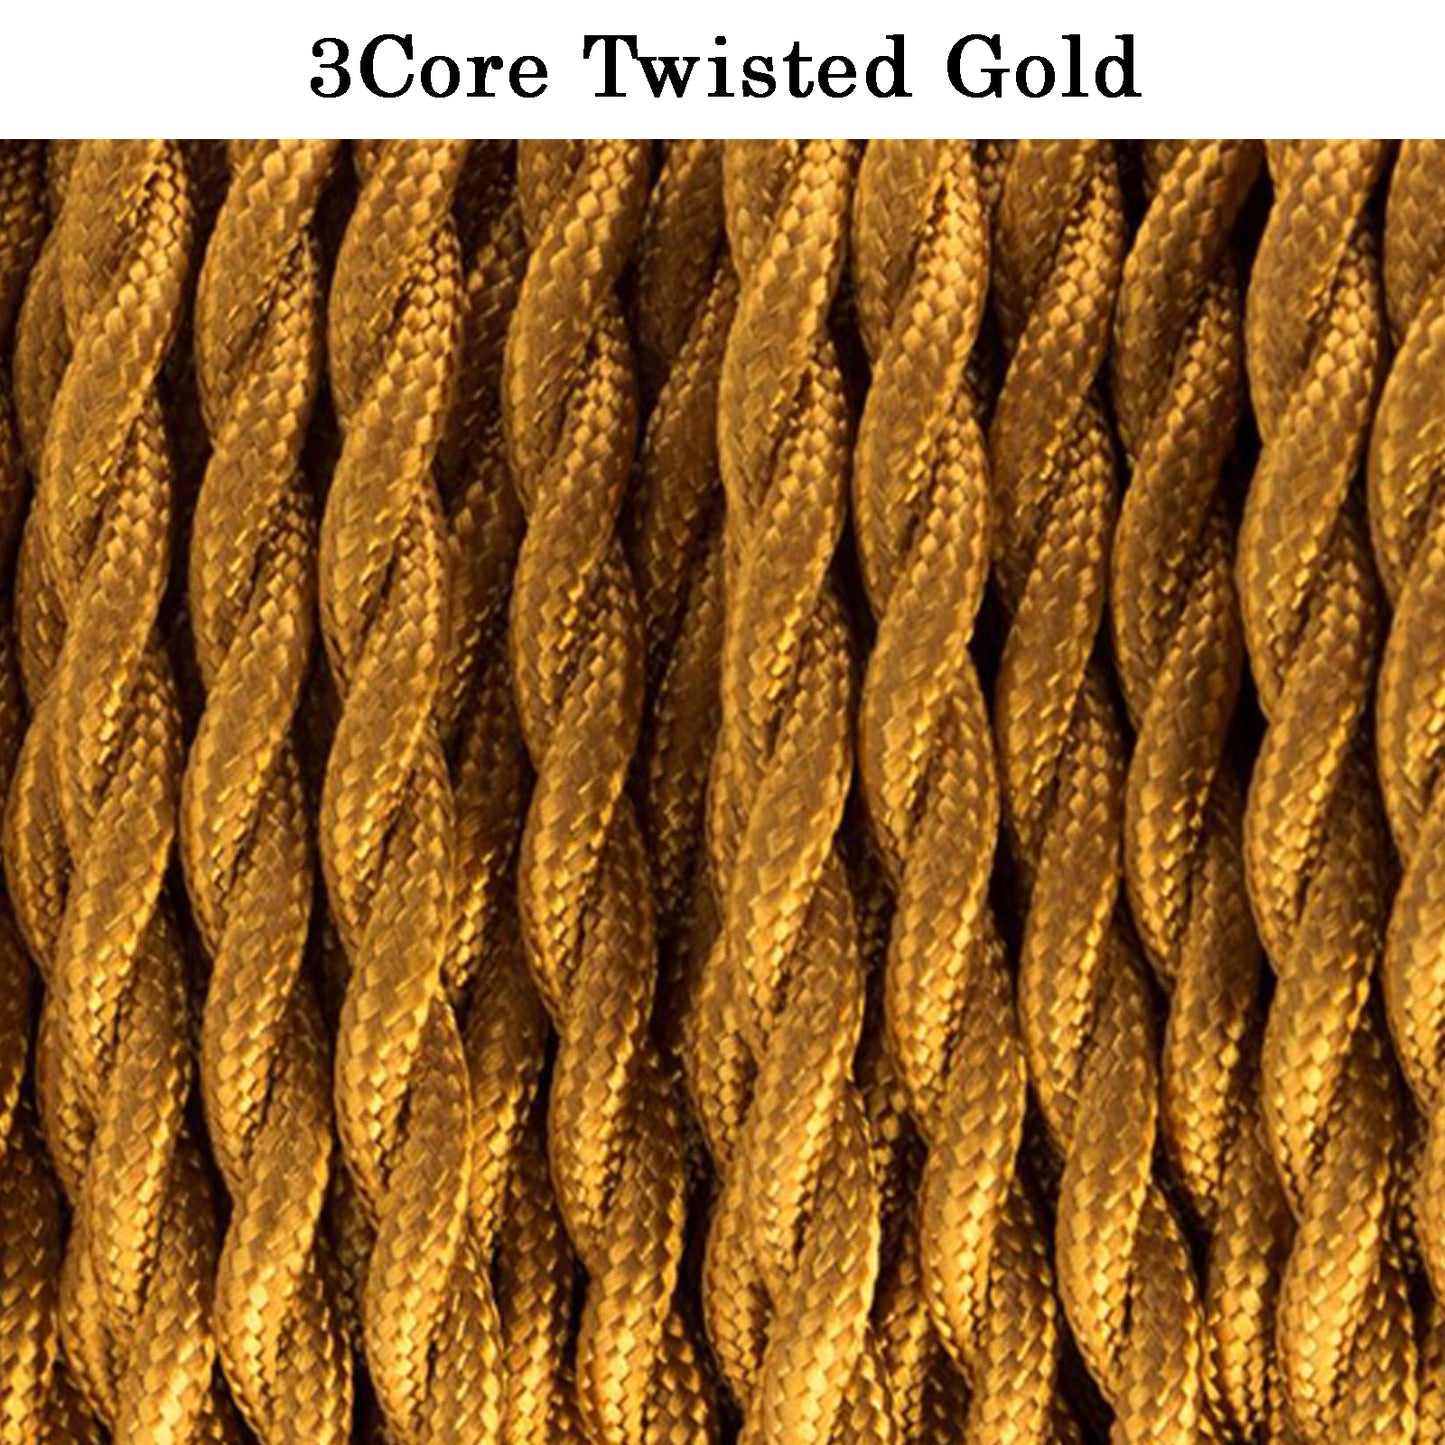 Vintage Twisted Gold Electric fabric Cable Flex 0.75mm -3 Core